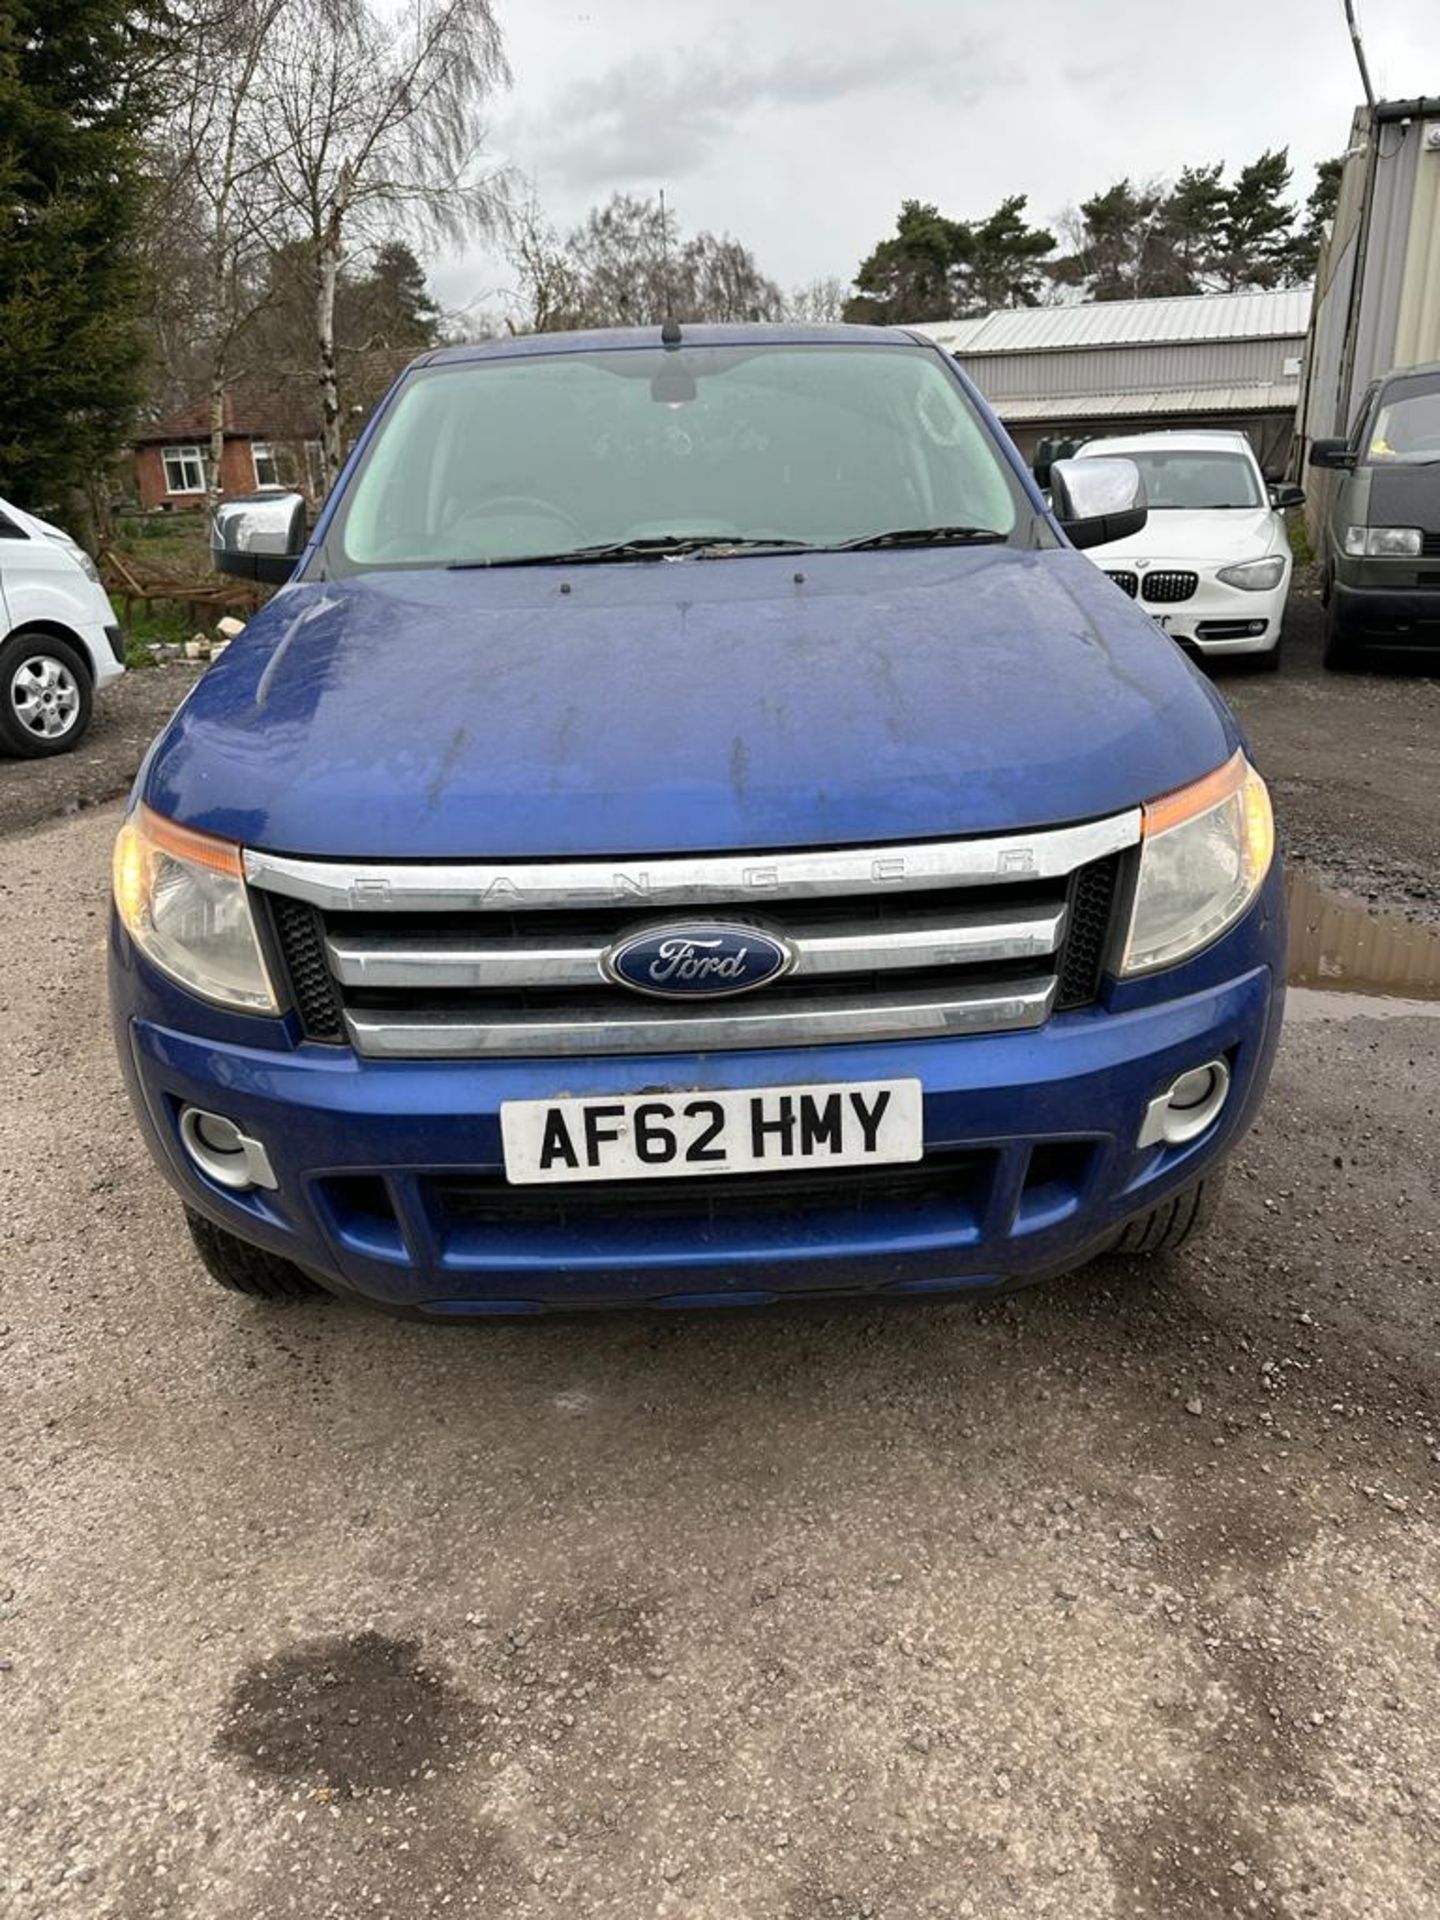 2012 62 FORD RANGER - TOWBAR - REAR CANOPY - ALLOY WHEELS - 63K MILES - AF62 HMY - Image 2 of 5